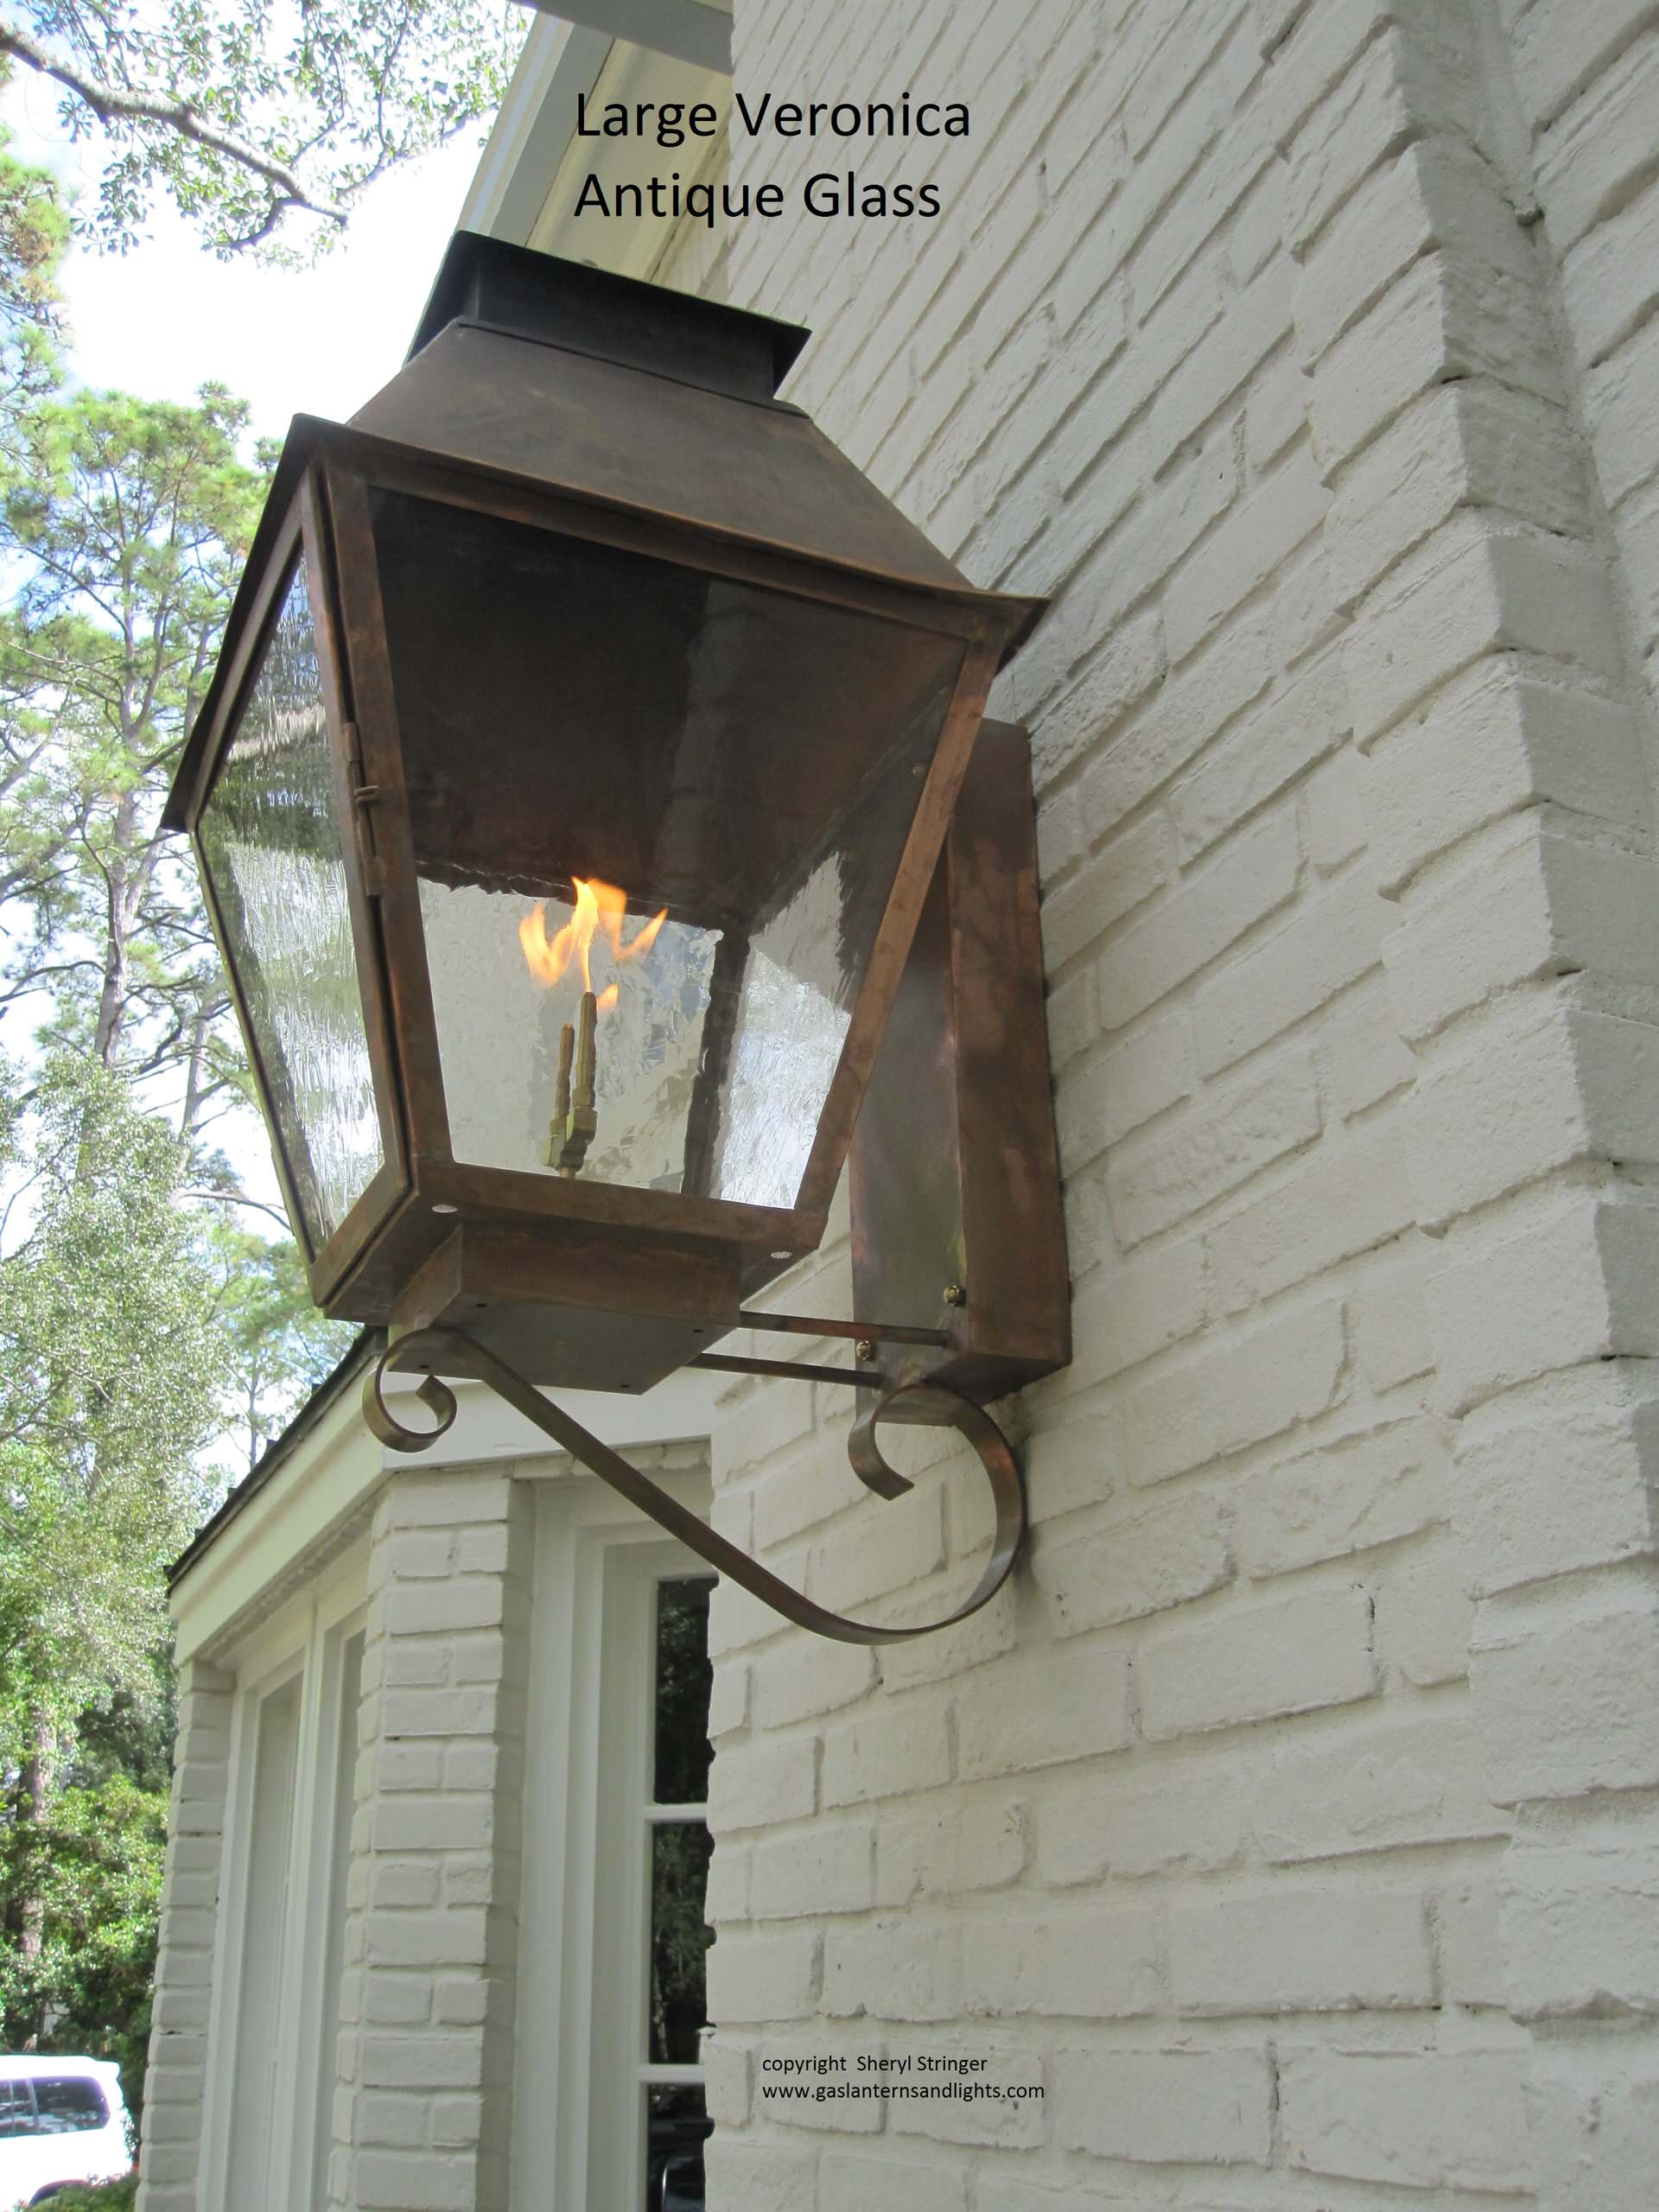 Glass Options for Gas Lanterns by Sheryl Stringer